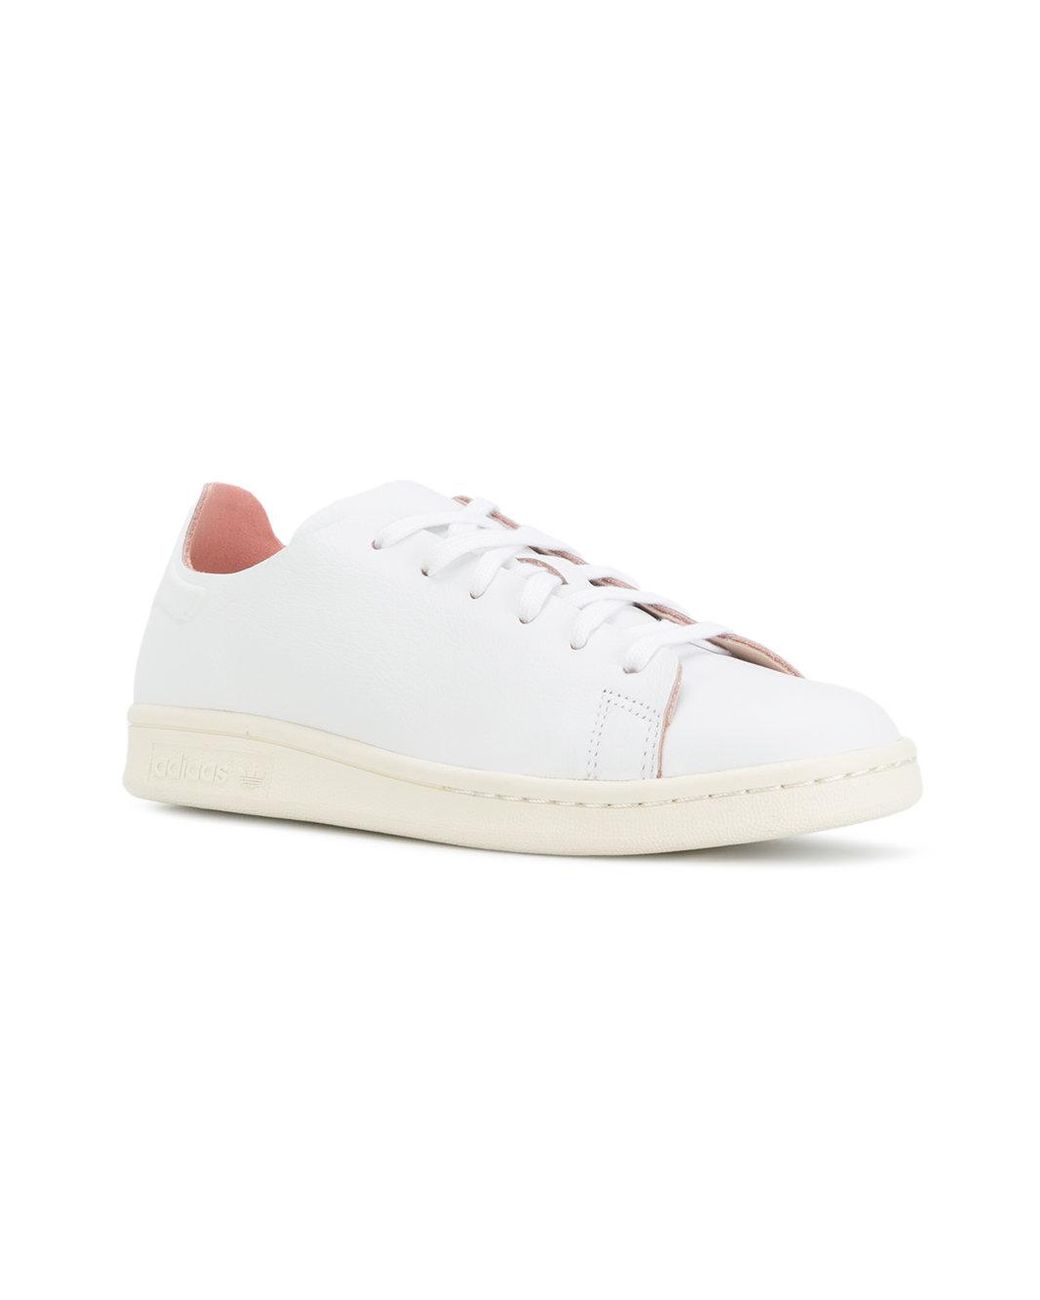 adidas Leather Stan Smith Nude Sneakers in White | Lyst